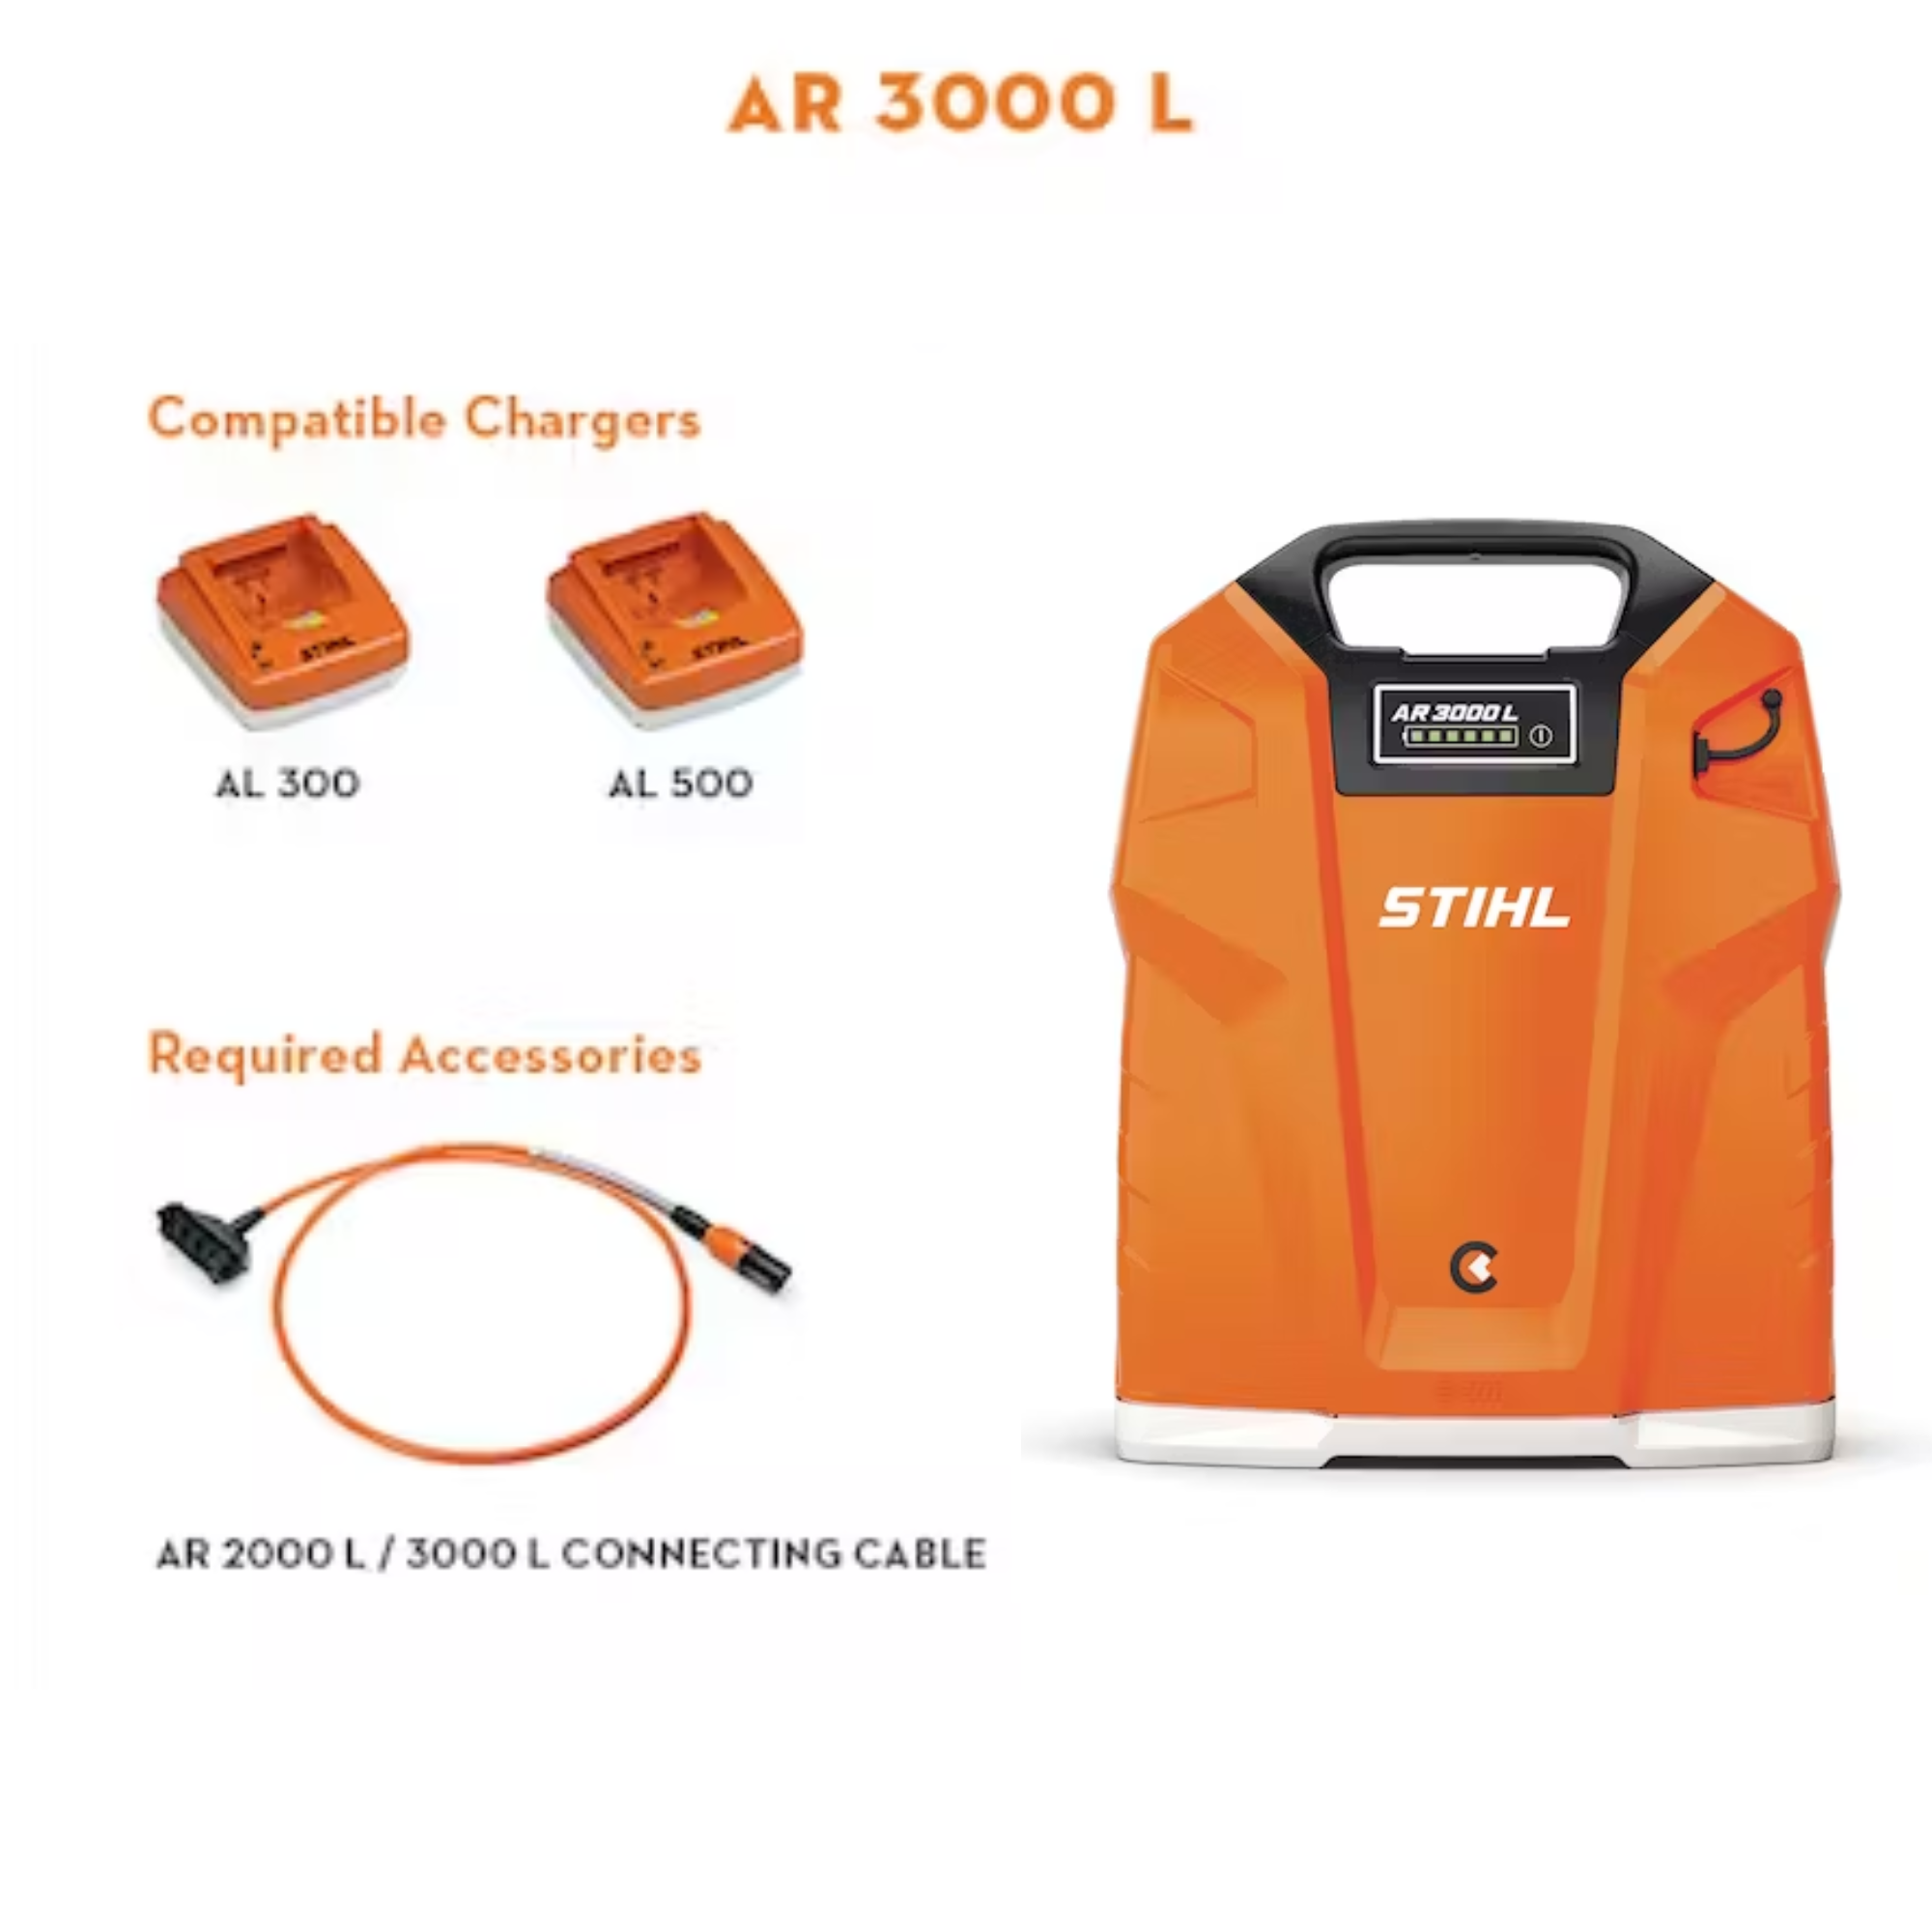 Stihl AR 3000 L Lithium Ion Backpack Battery